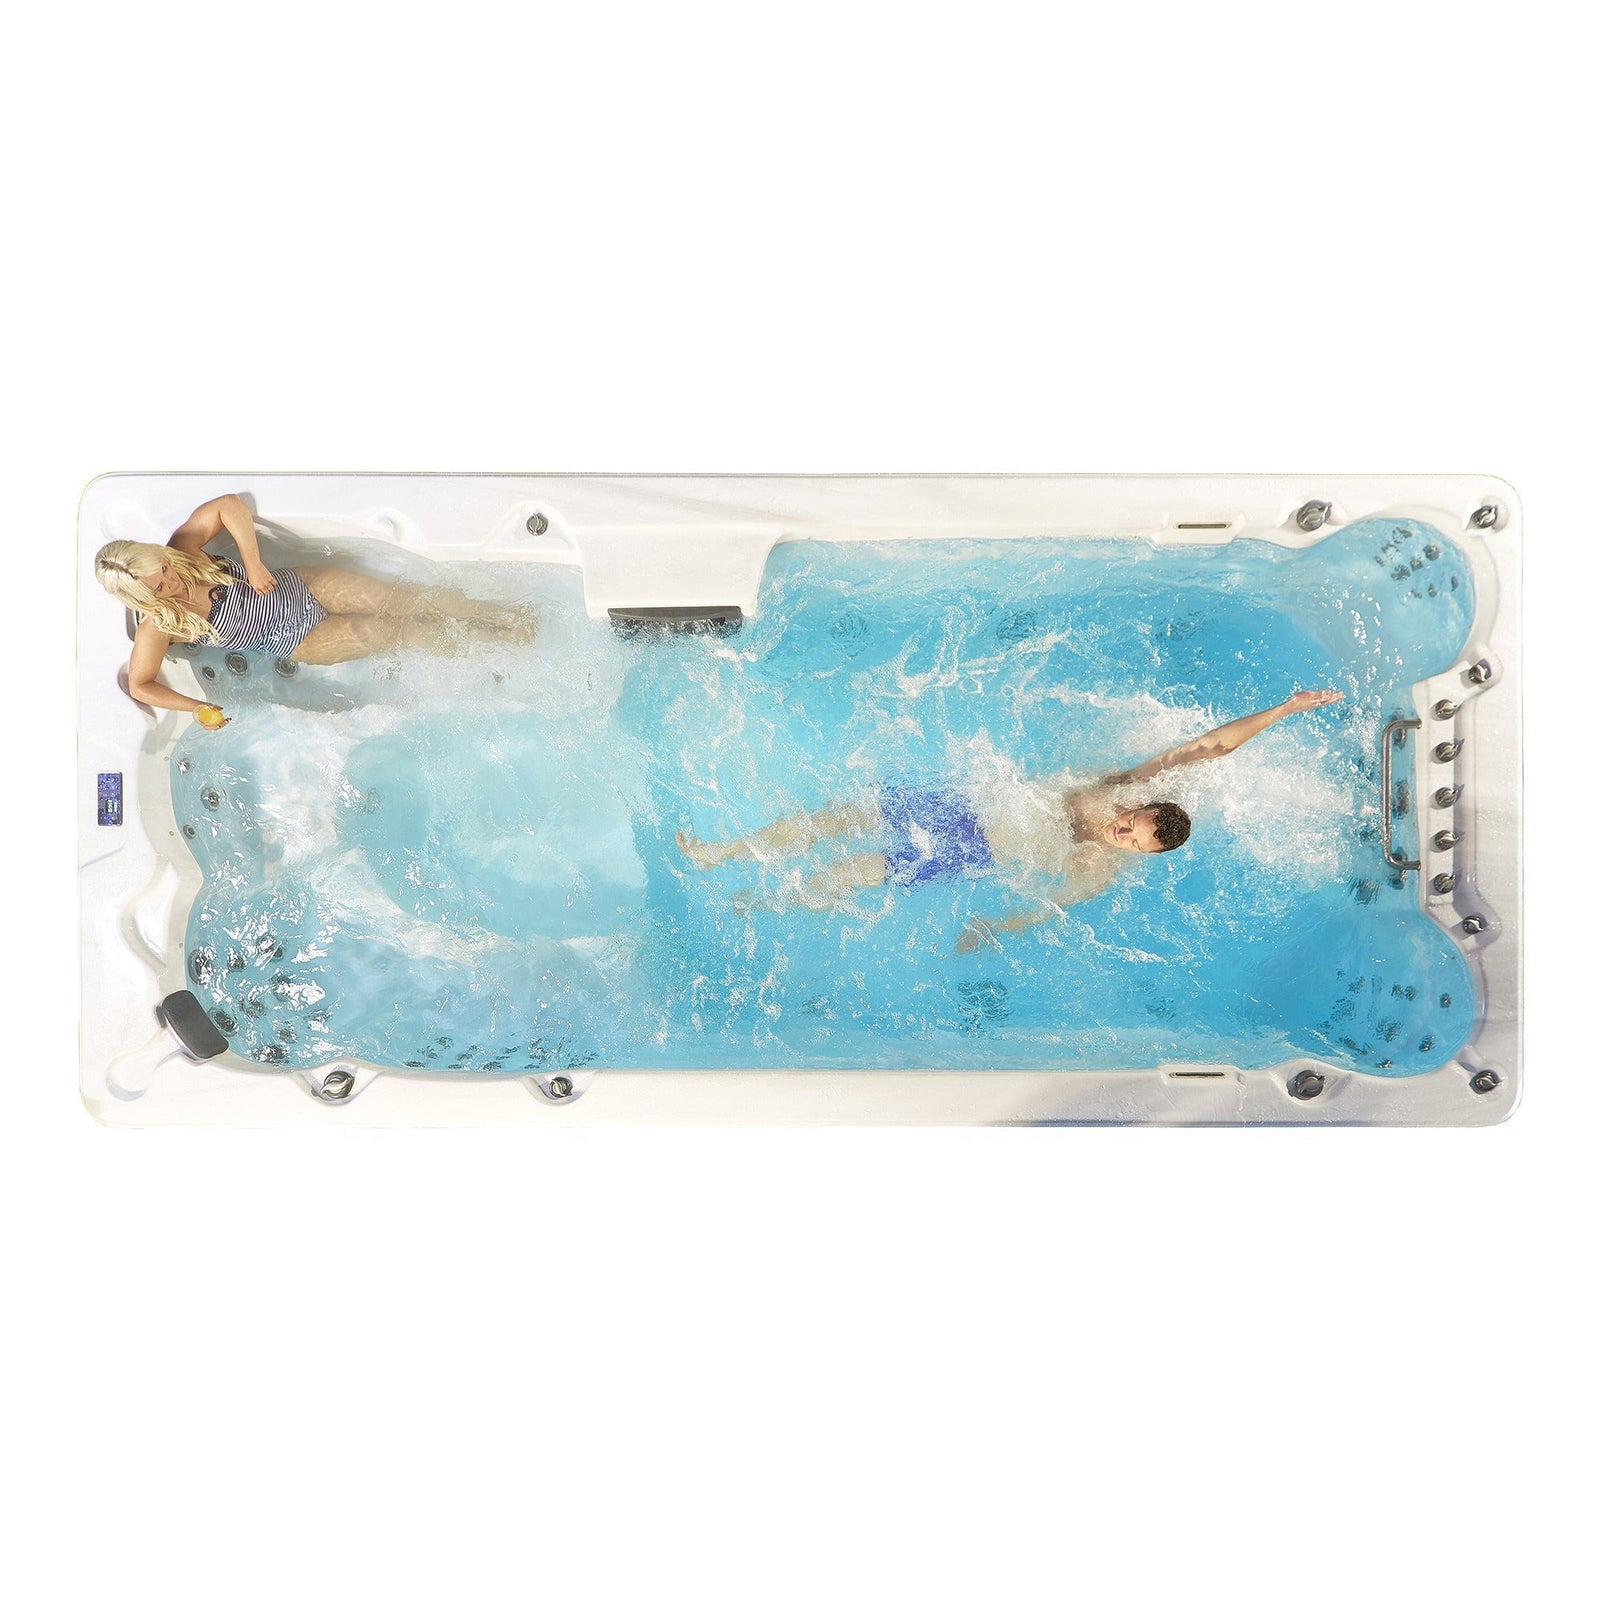 Canadian Spa 16ft Swim Spa 19HP-Jet 7-Person XTrainer